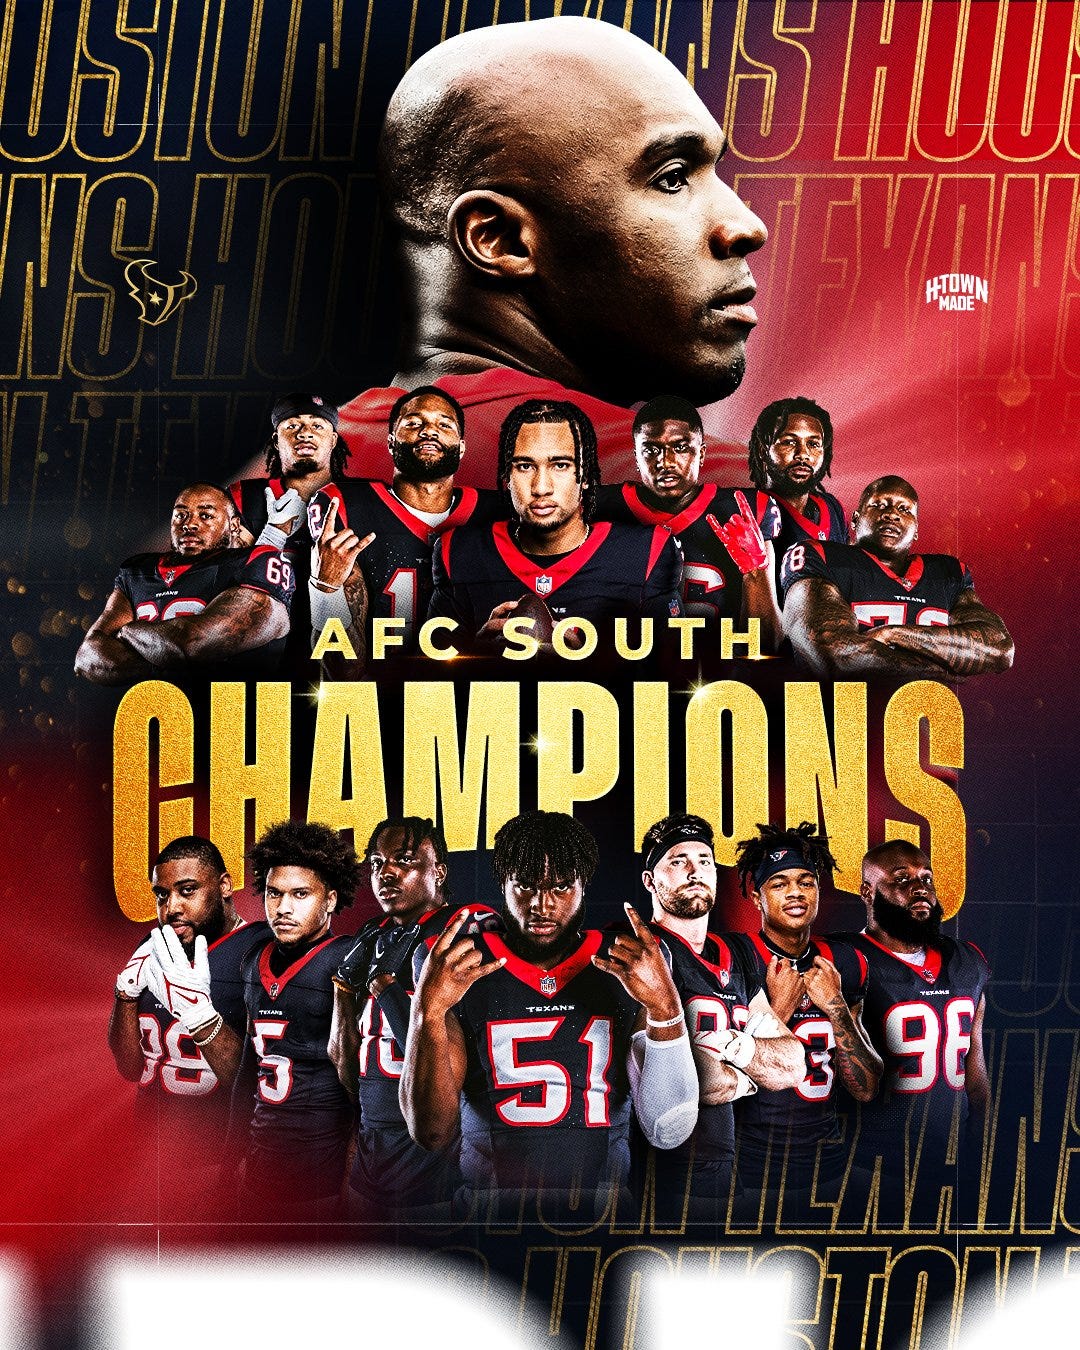 AFC South Champions! What's Next for the Texans?